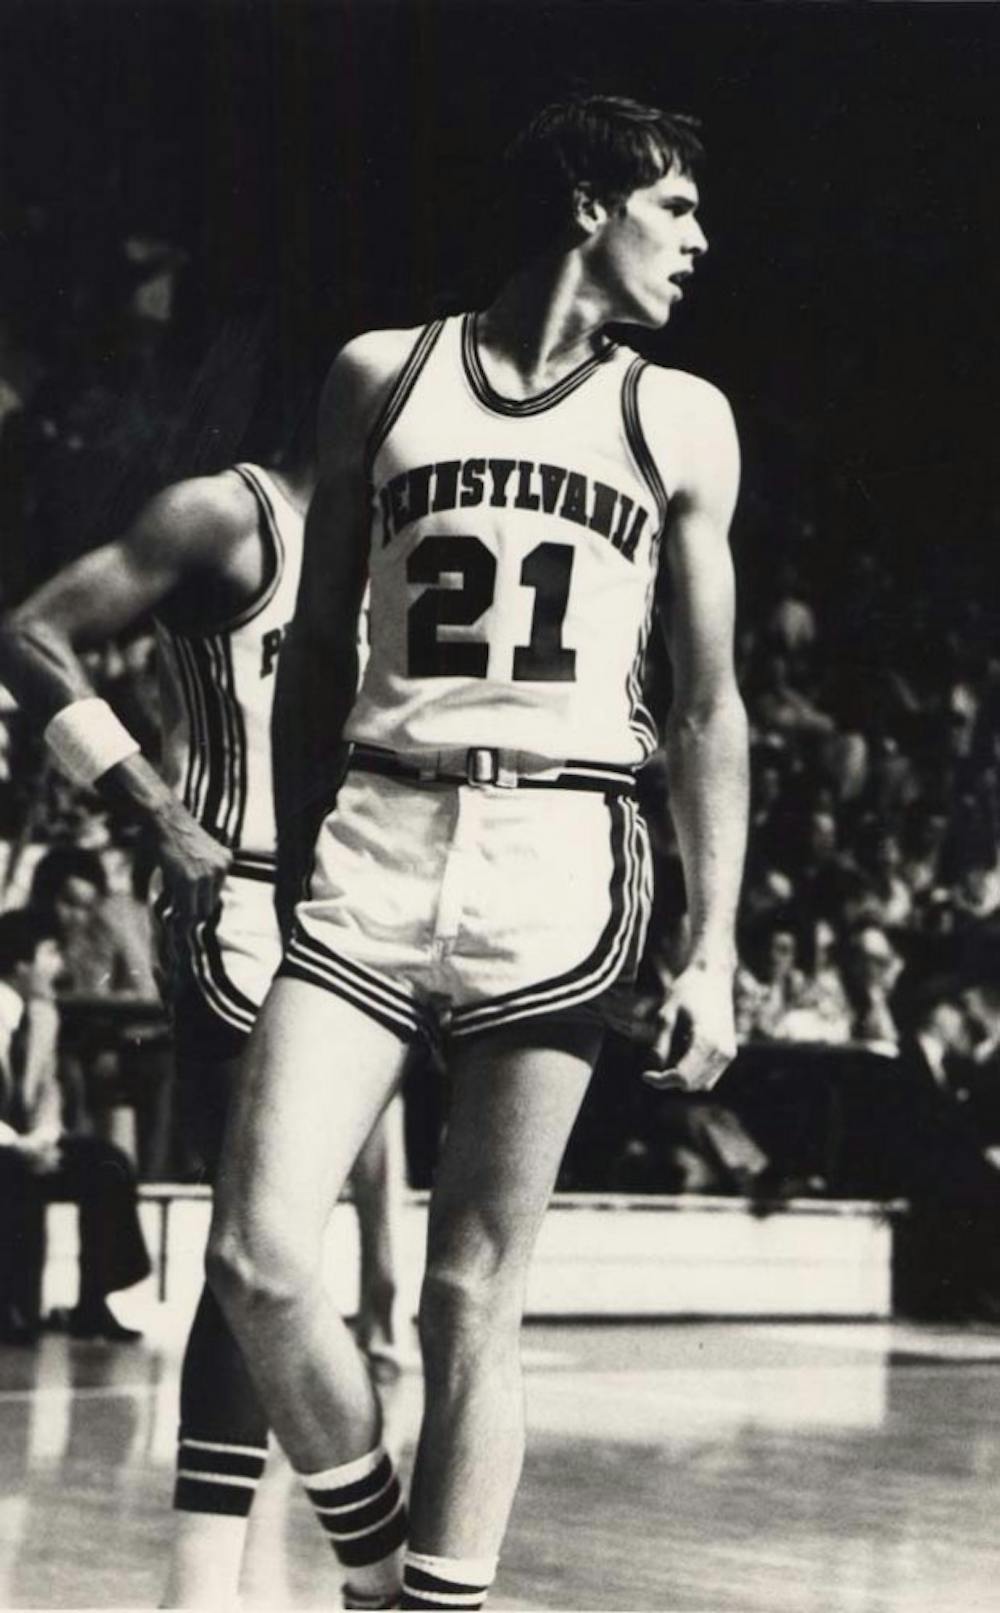 	Former Penn center Matt White, a member of the 1979 Final Four team, was stabbed to death at his Delaware County home Monday night.